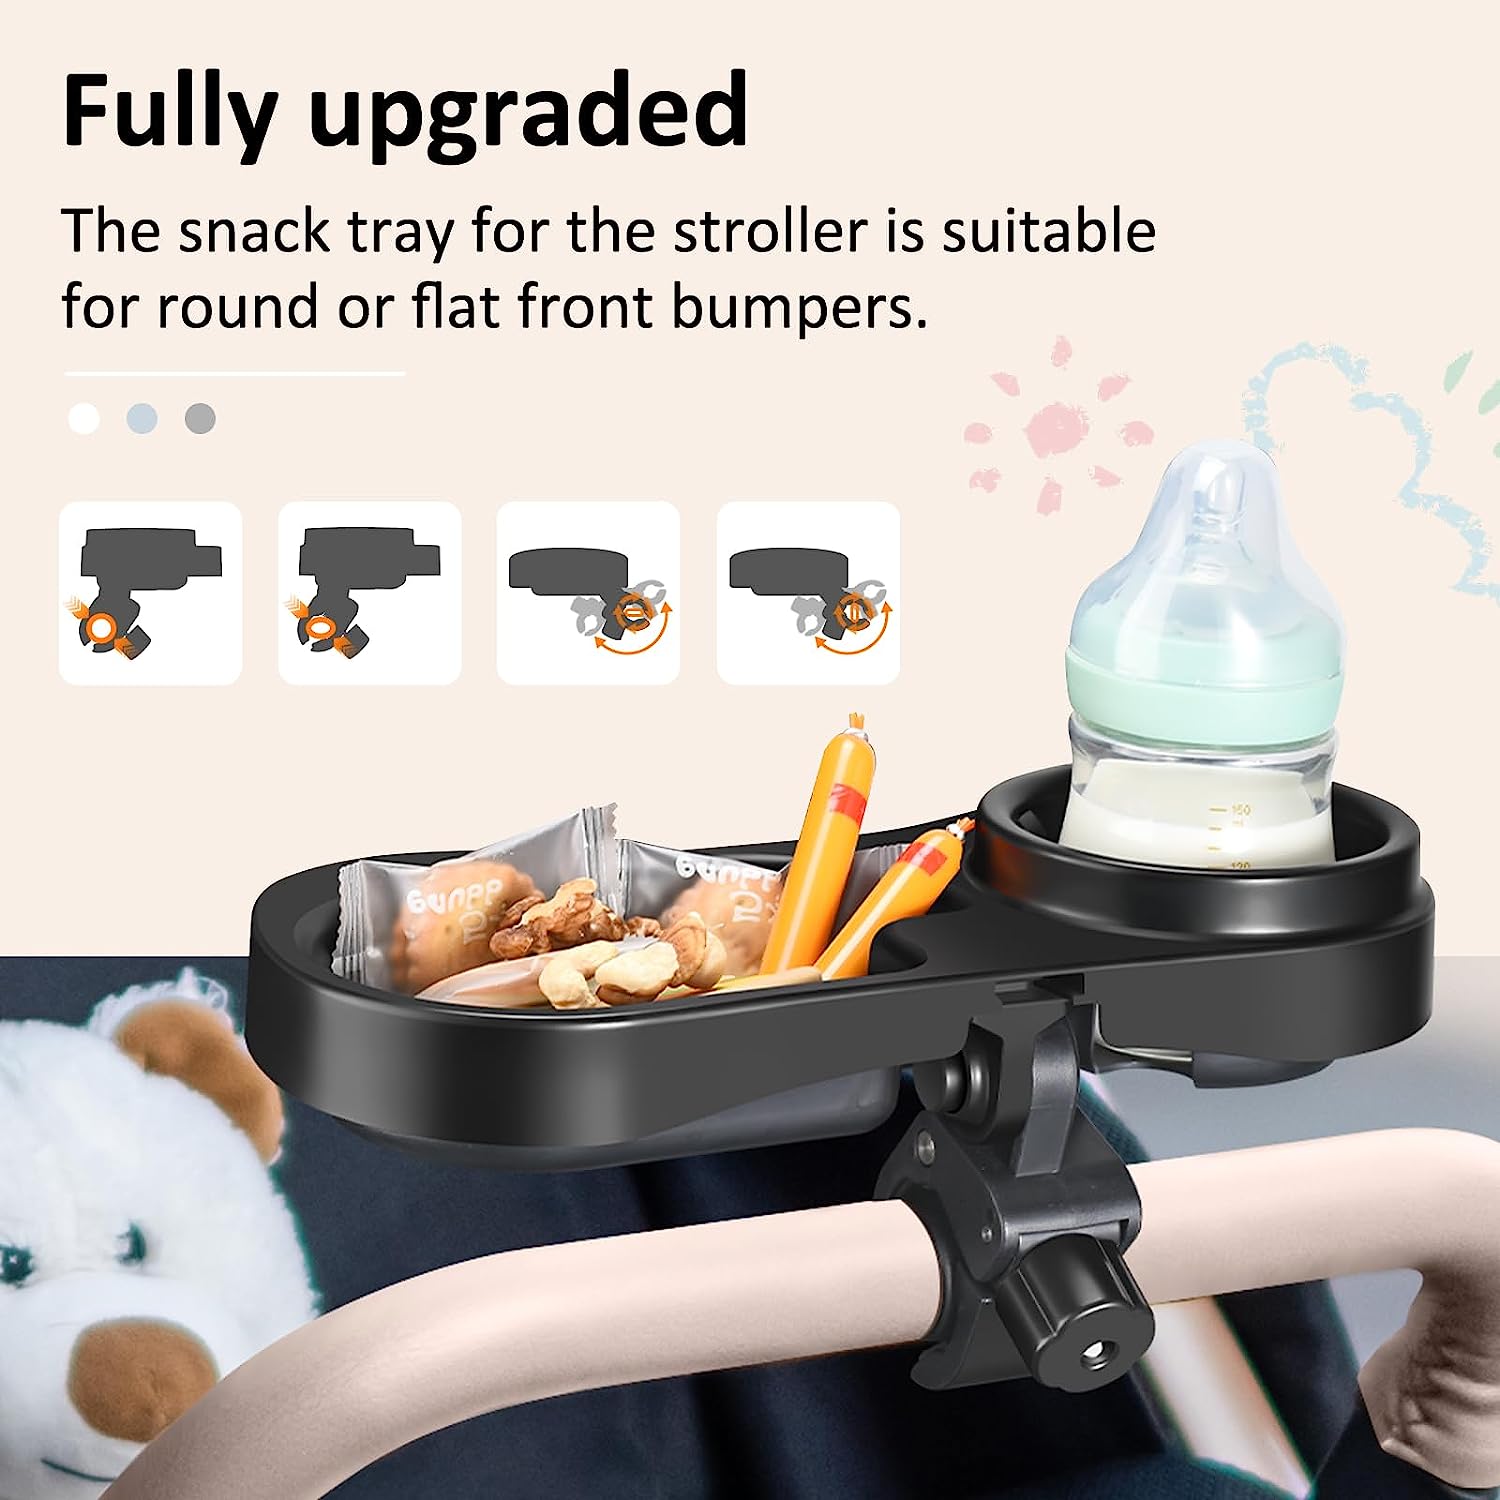 2 in 1 Universal Stroller Snack Tray with Cup Holder, Snack Catcher and Drink Holder for Stroller Snack Tray Attachment - Upgraded Removable Clip for Bumper Bar of Stroller Tray for Baby (Black)